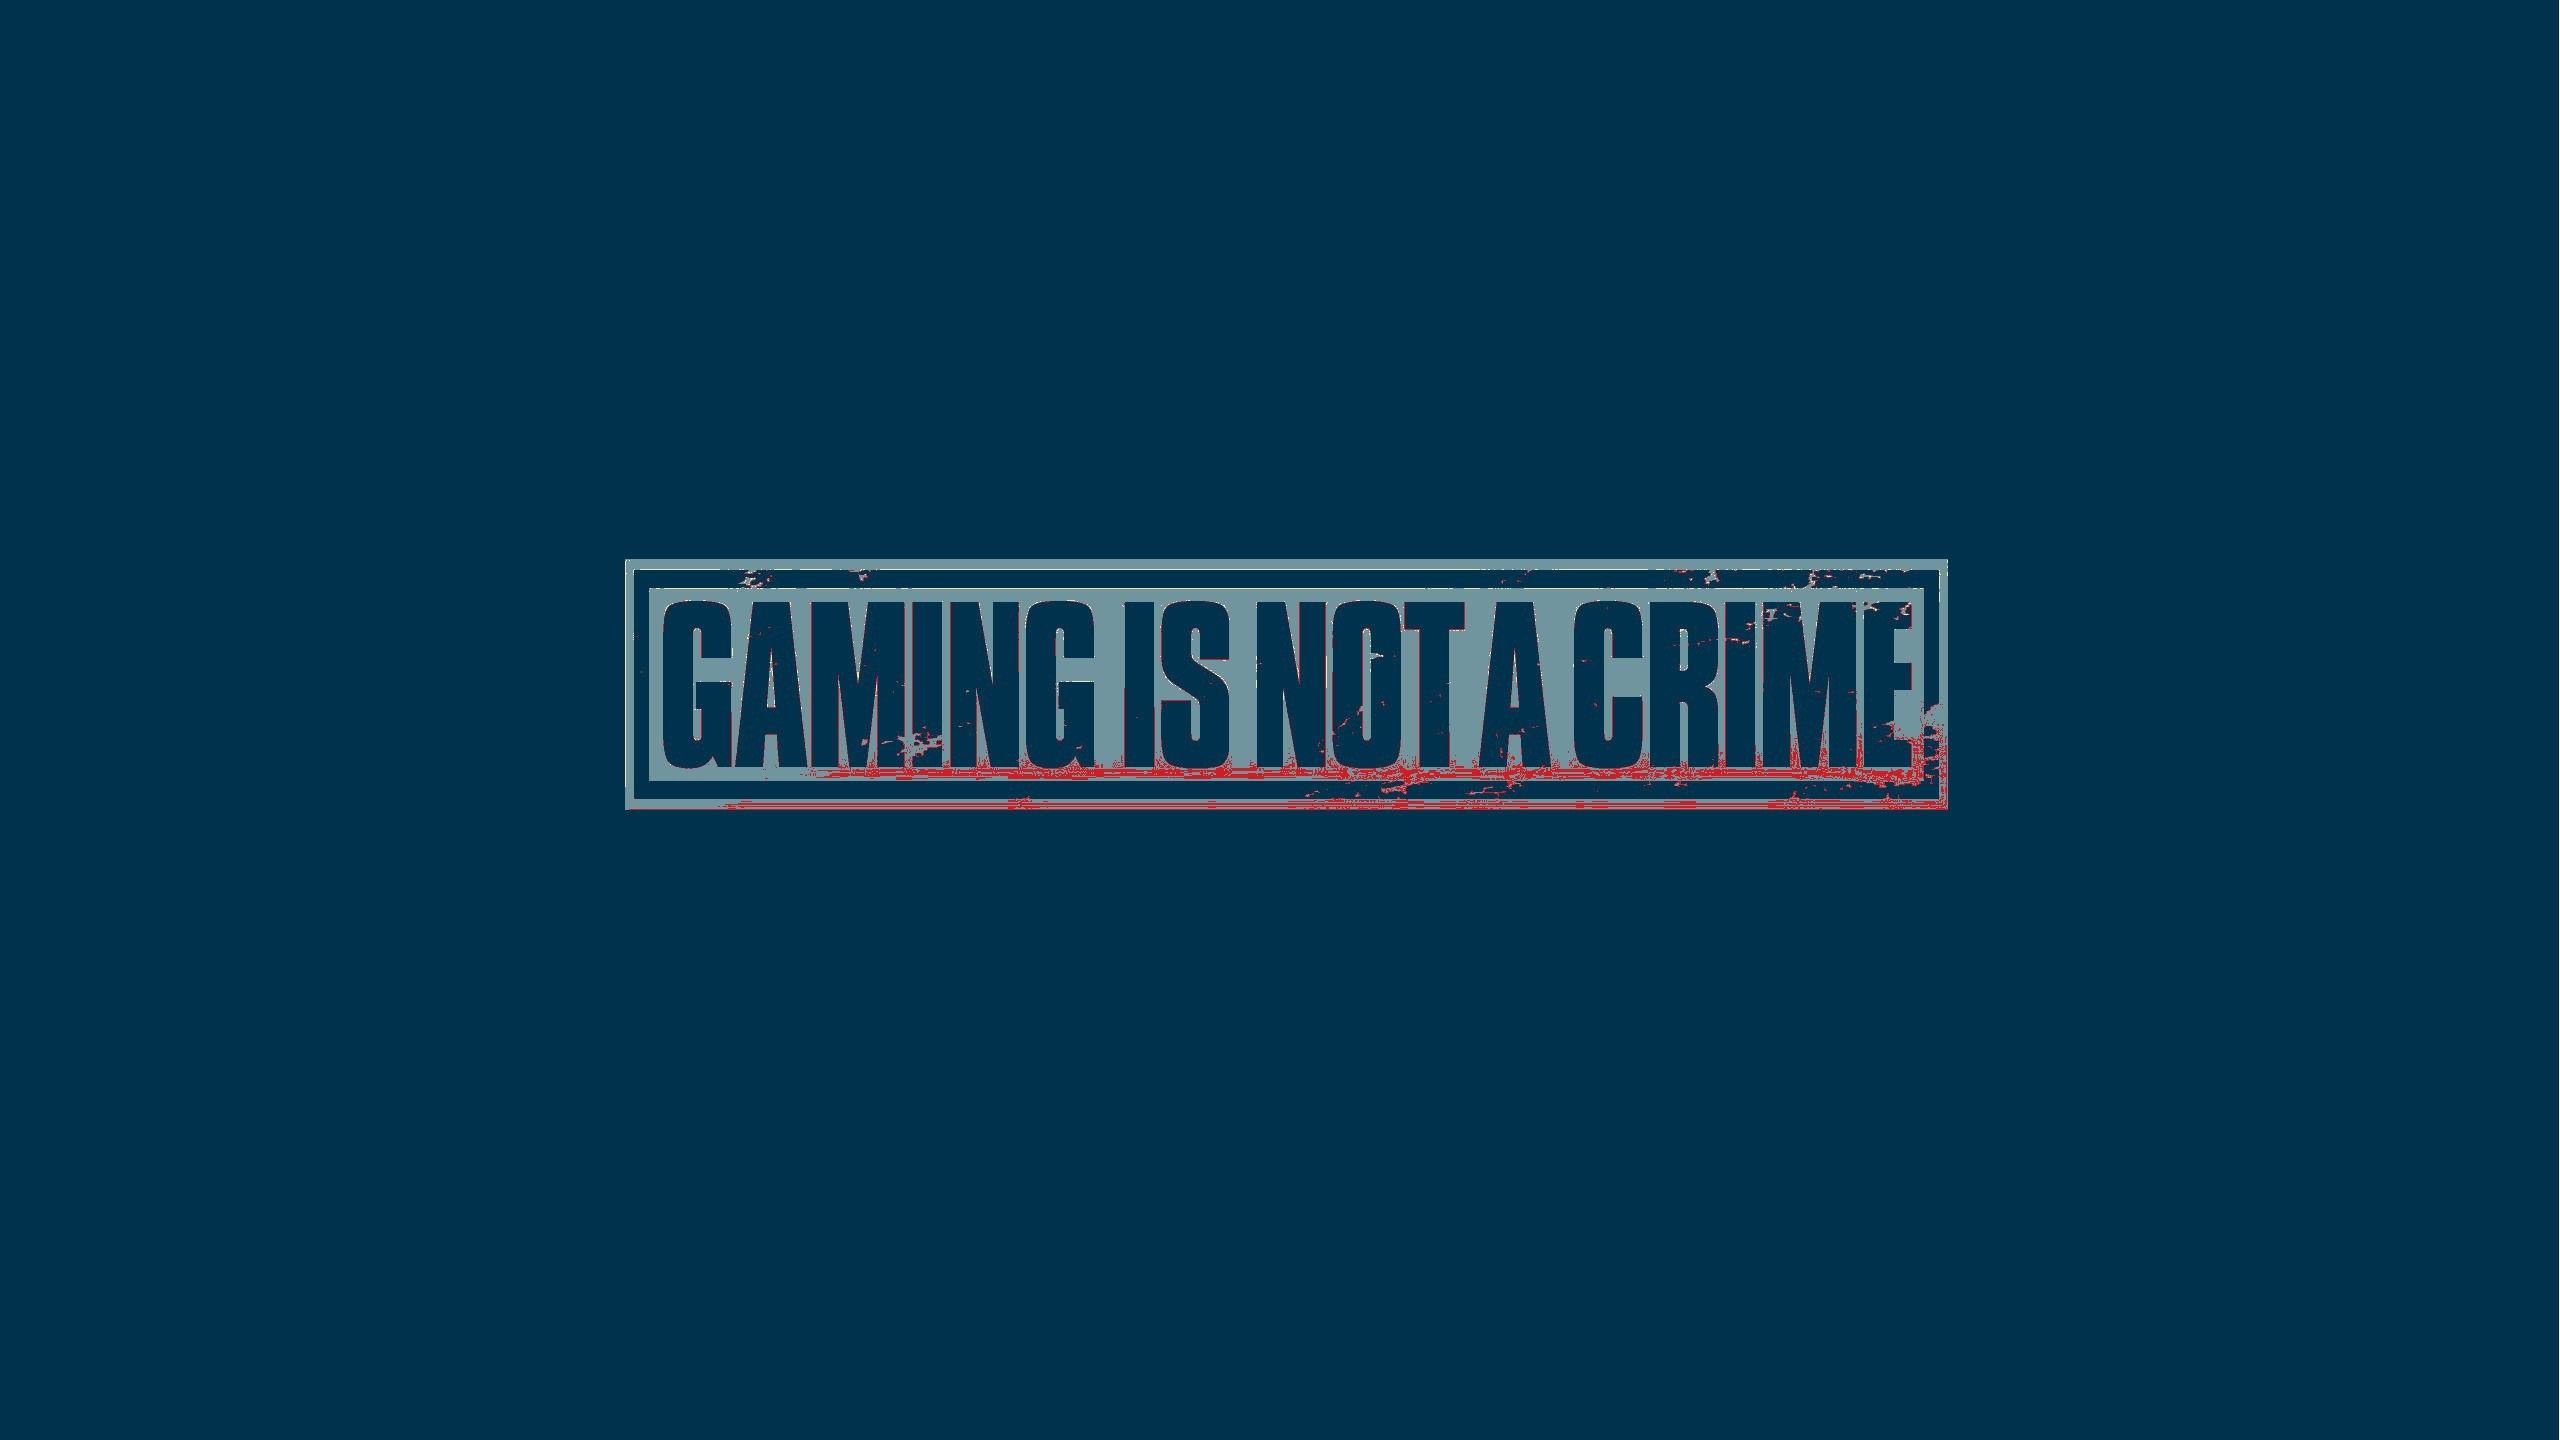 HD Wallpaper, quotes Wallpaper HD, Video, Gamer, Game, Poster, Quote About Life Mobile, Computer, gaming